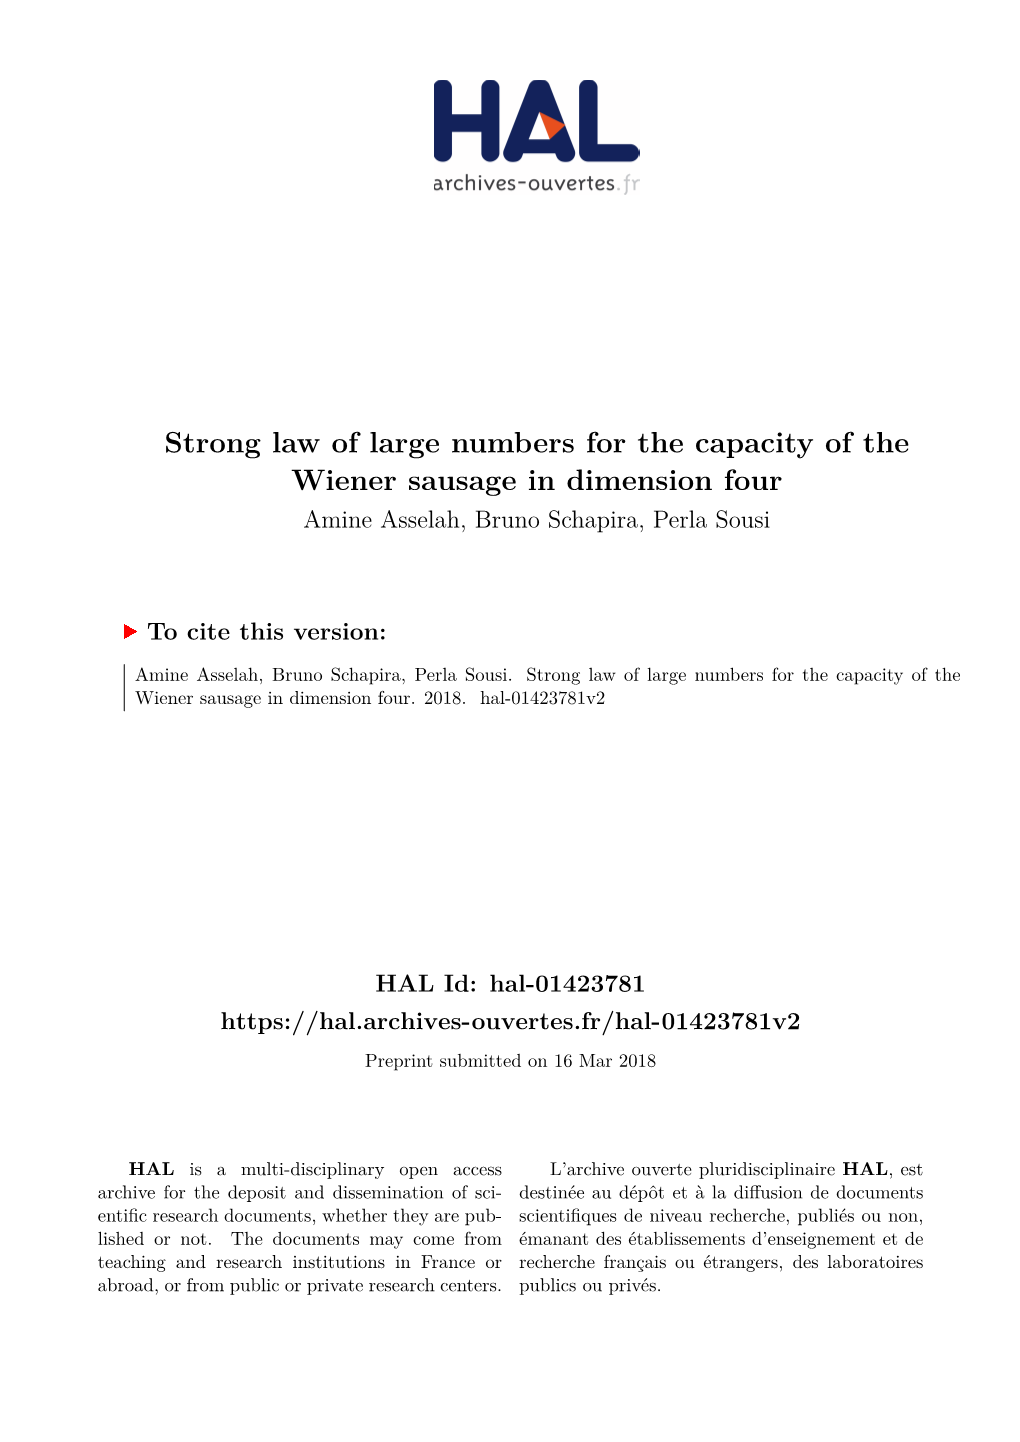 Strong Law of Large Numbers for the Capacity of the Wiener Sausage in Dimension Four Amine Asselah, Bruno Schapira, Perla Sousi